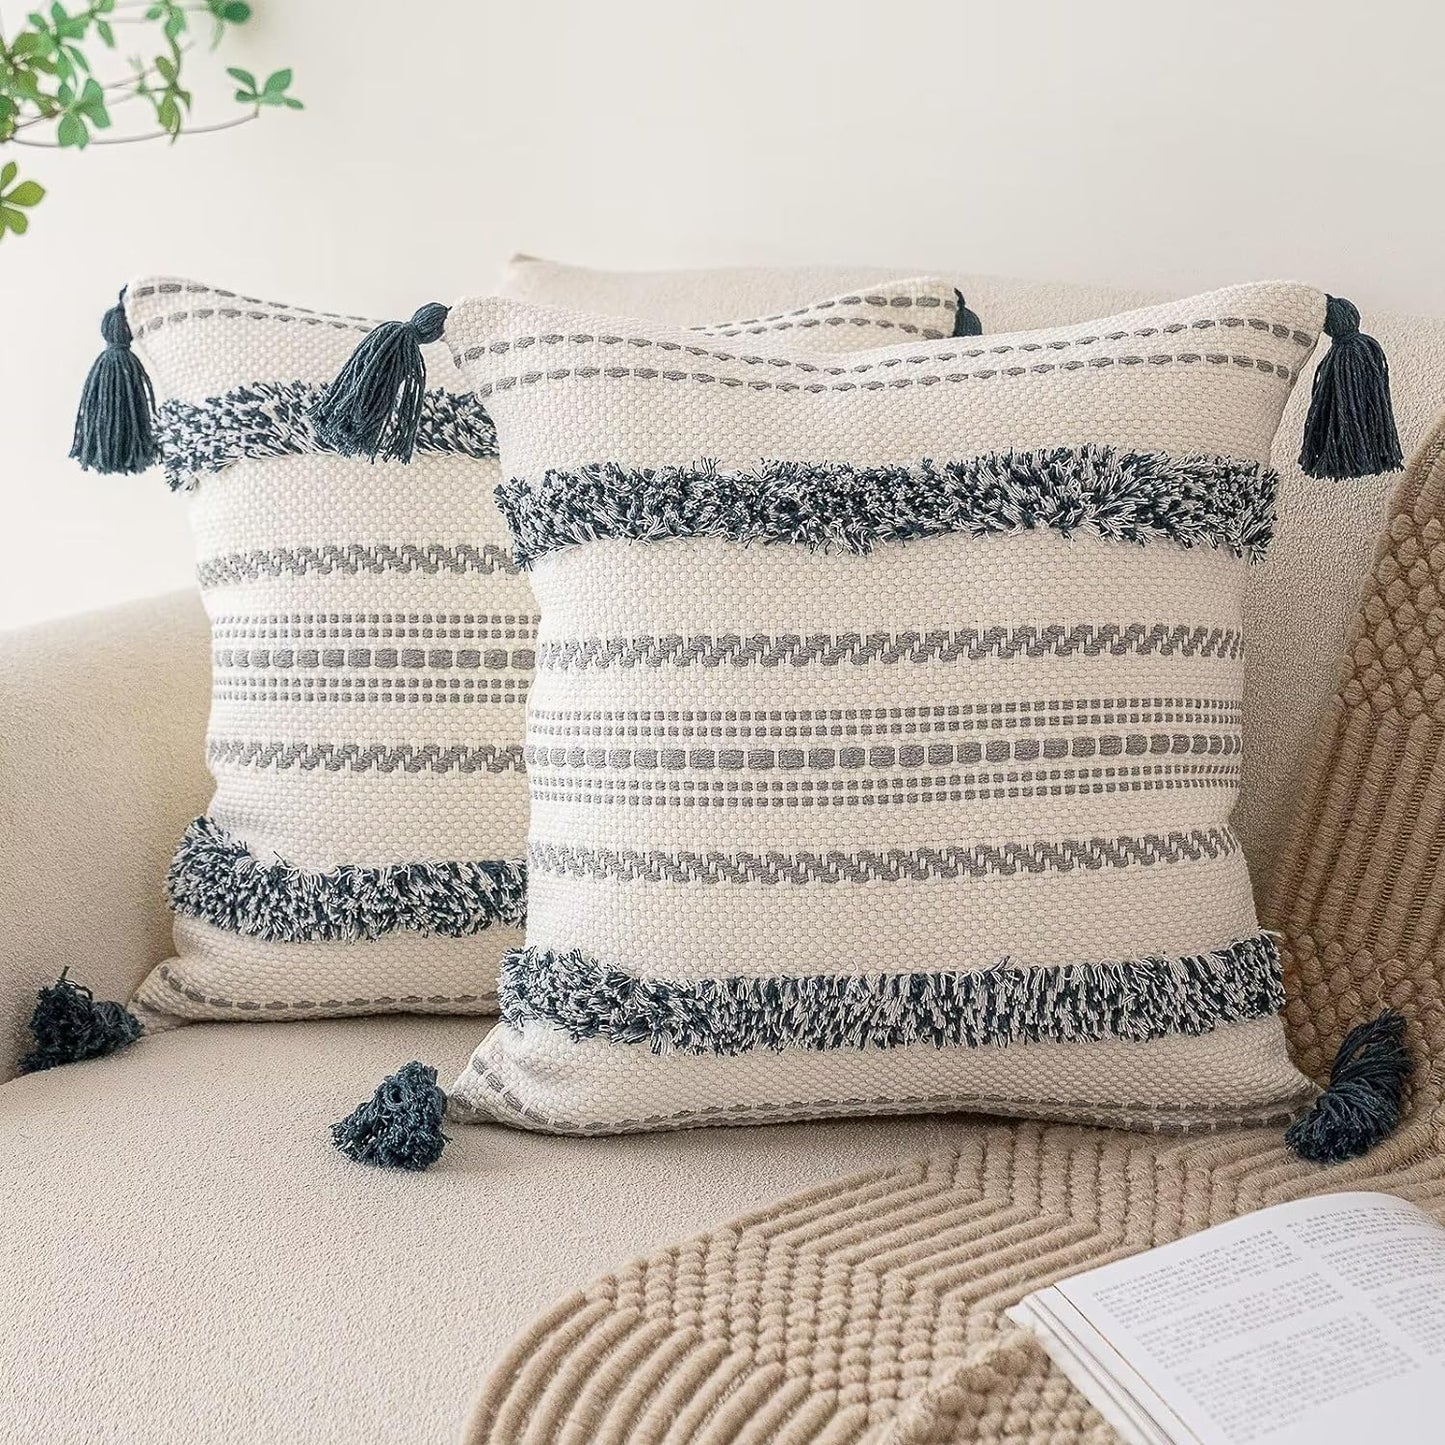 Boho Throw Pillow Covers 18x18 Set of 2 Woven Tufted Farmhouse Pillows Cover with Tassels Textured Striped Cushion Case Neutral Pillow Cases Decorative Pillowcase for Couch, Bed, Light Green